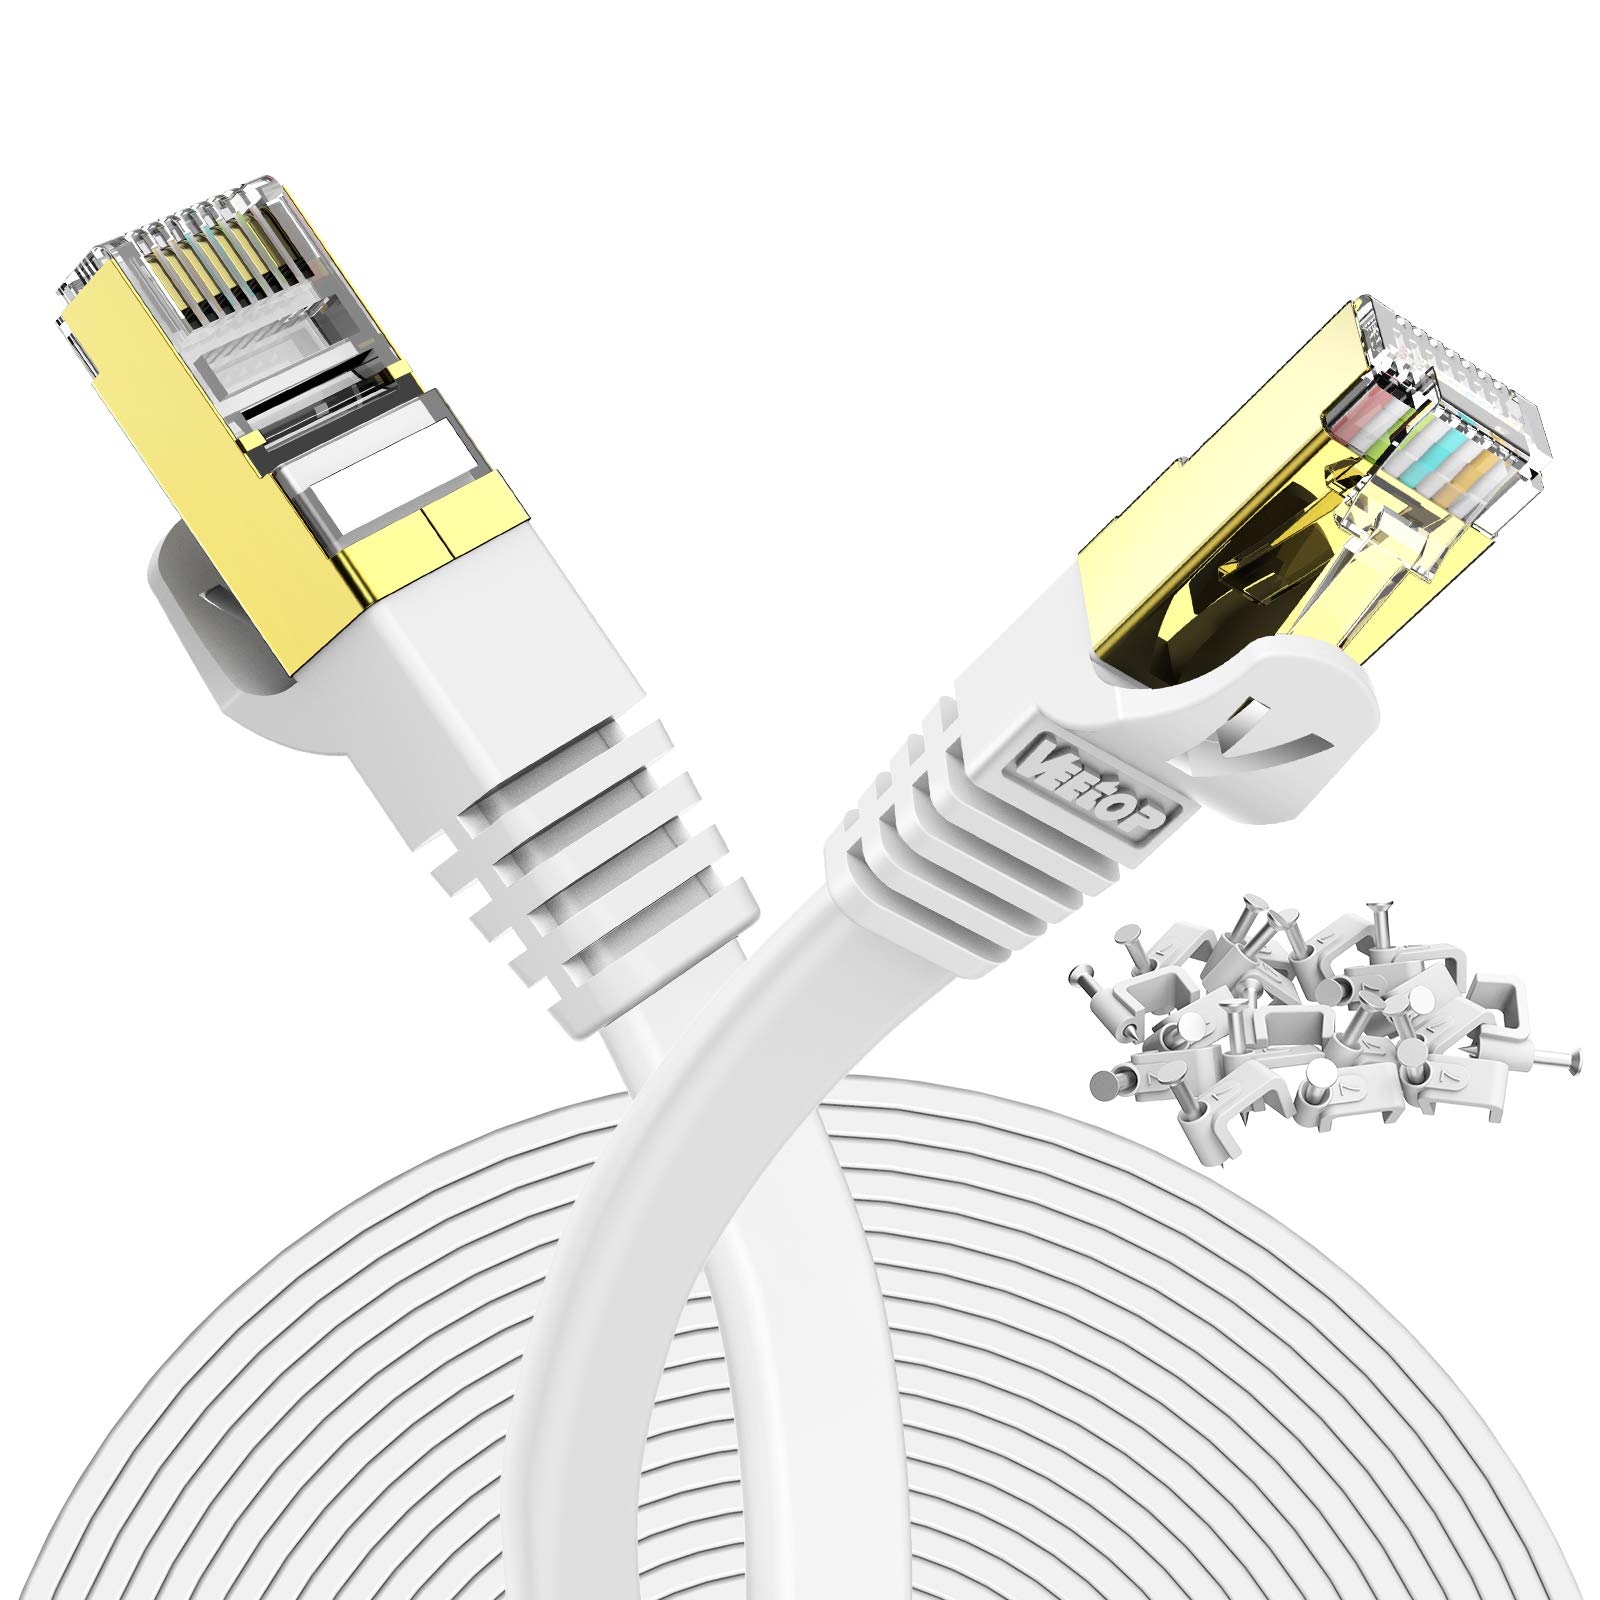 Ensure that the network cable is securely connected to the computer.
Inspect the cable for any visible damage.